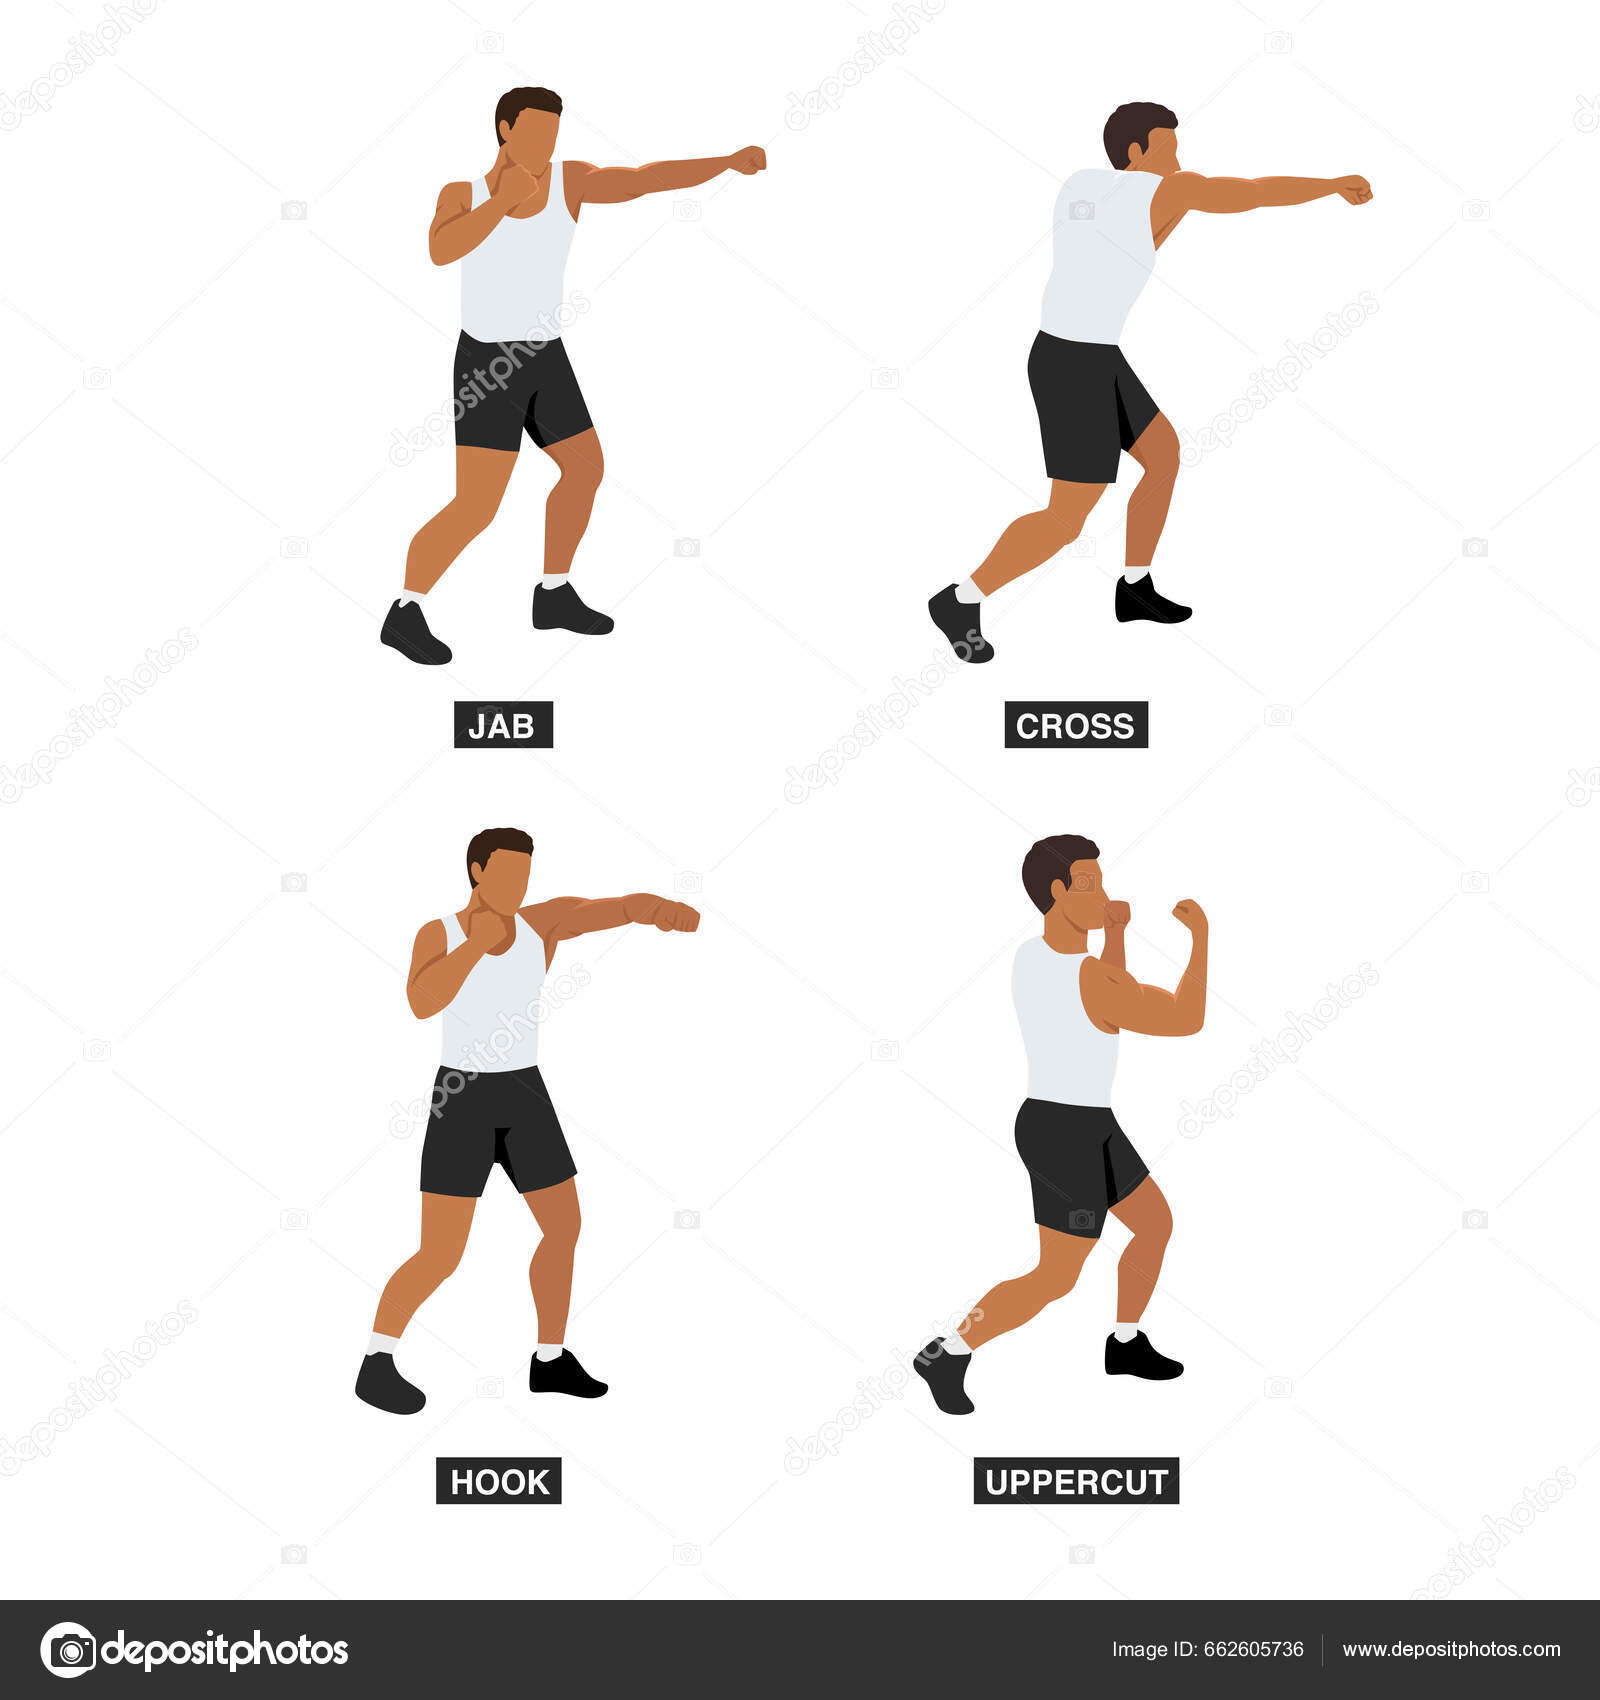 Man doing boxing moves exercise. Jab Cross Hook and Uppercut